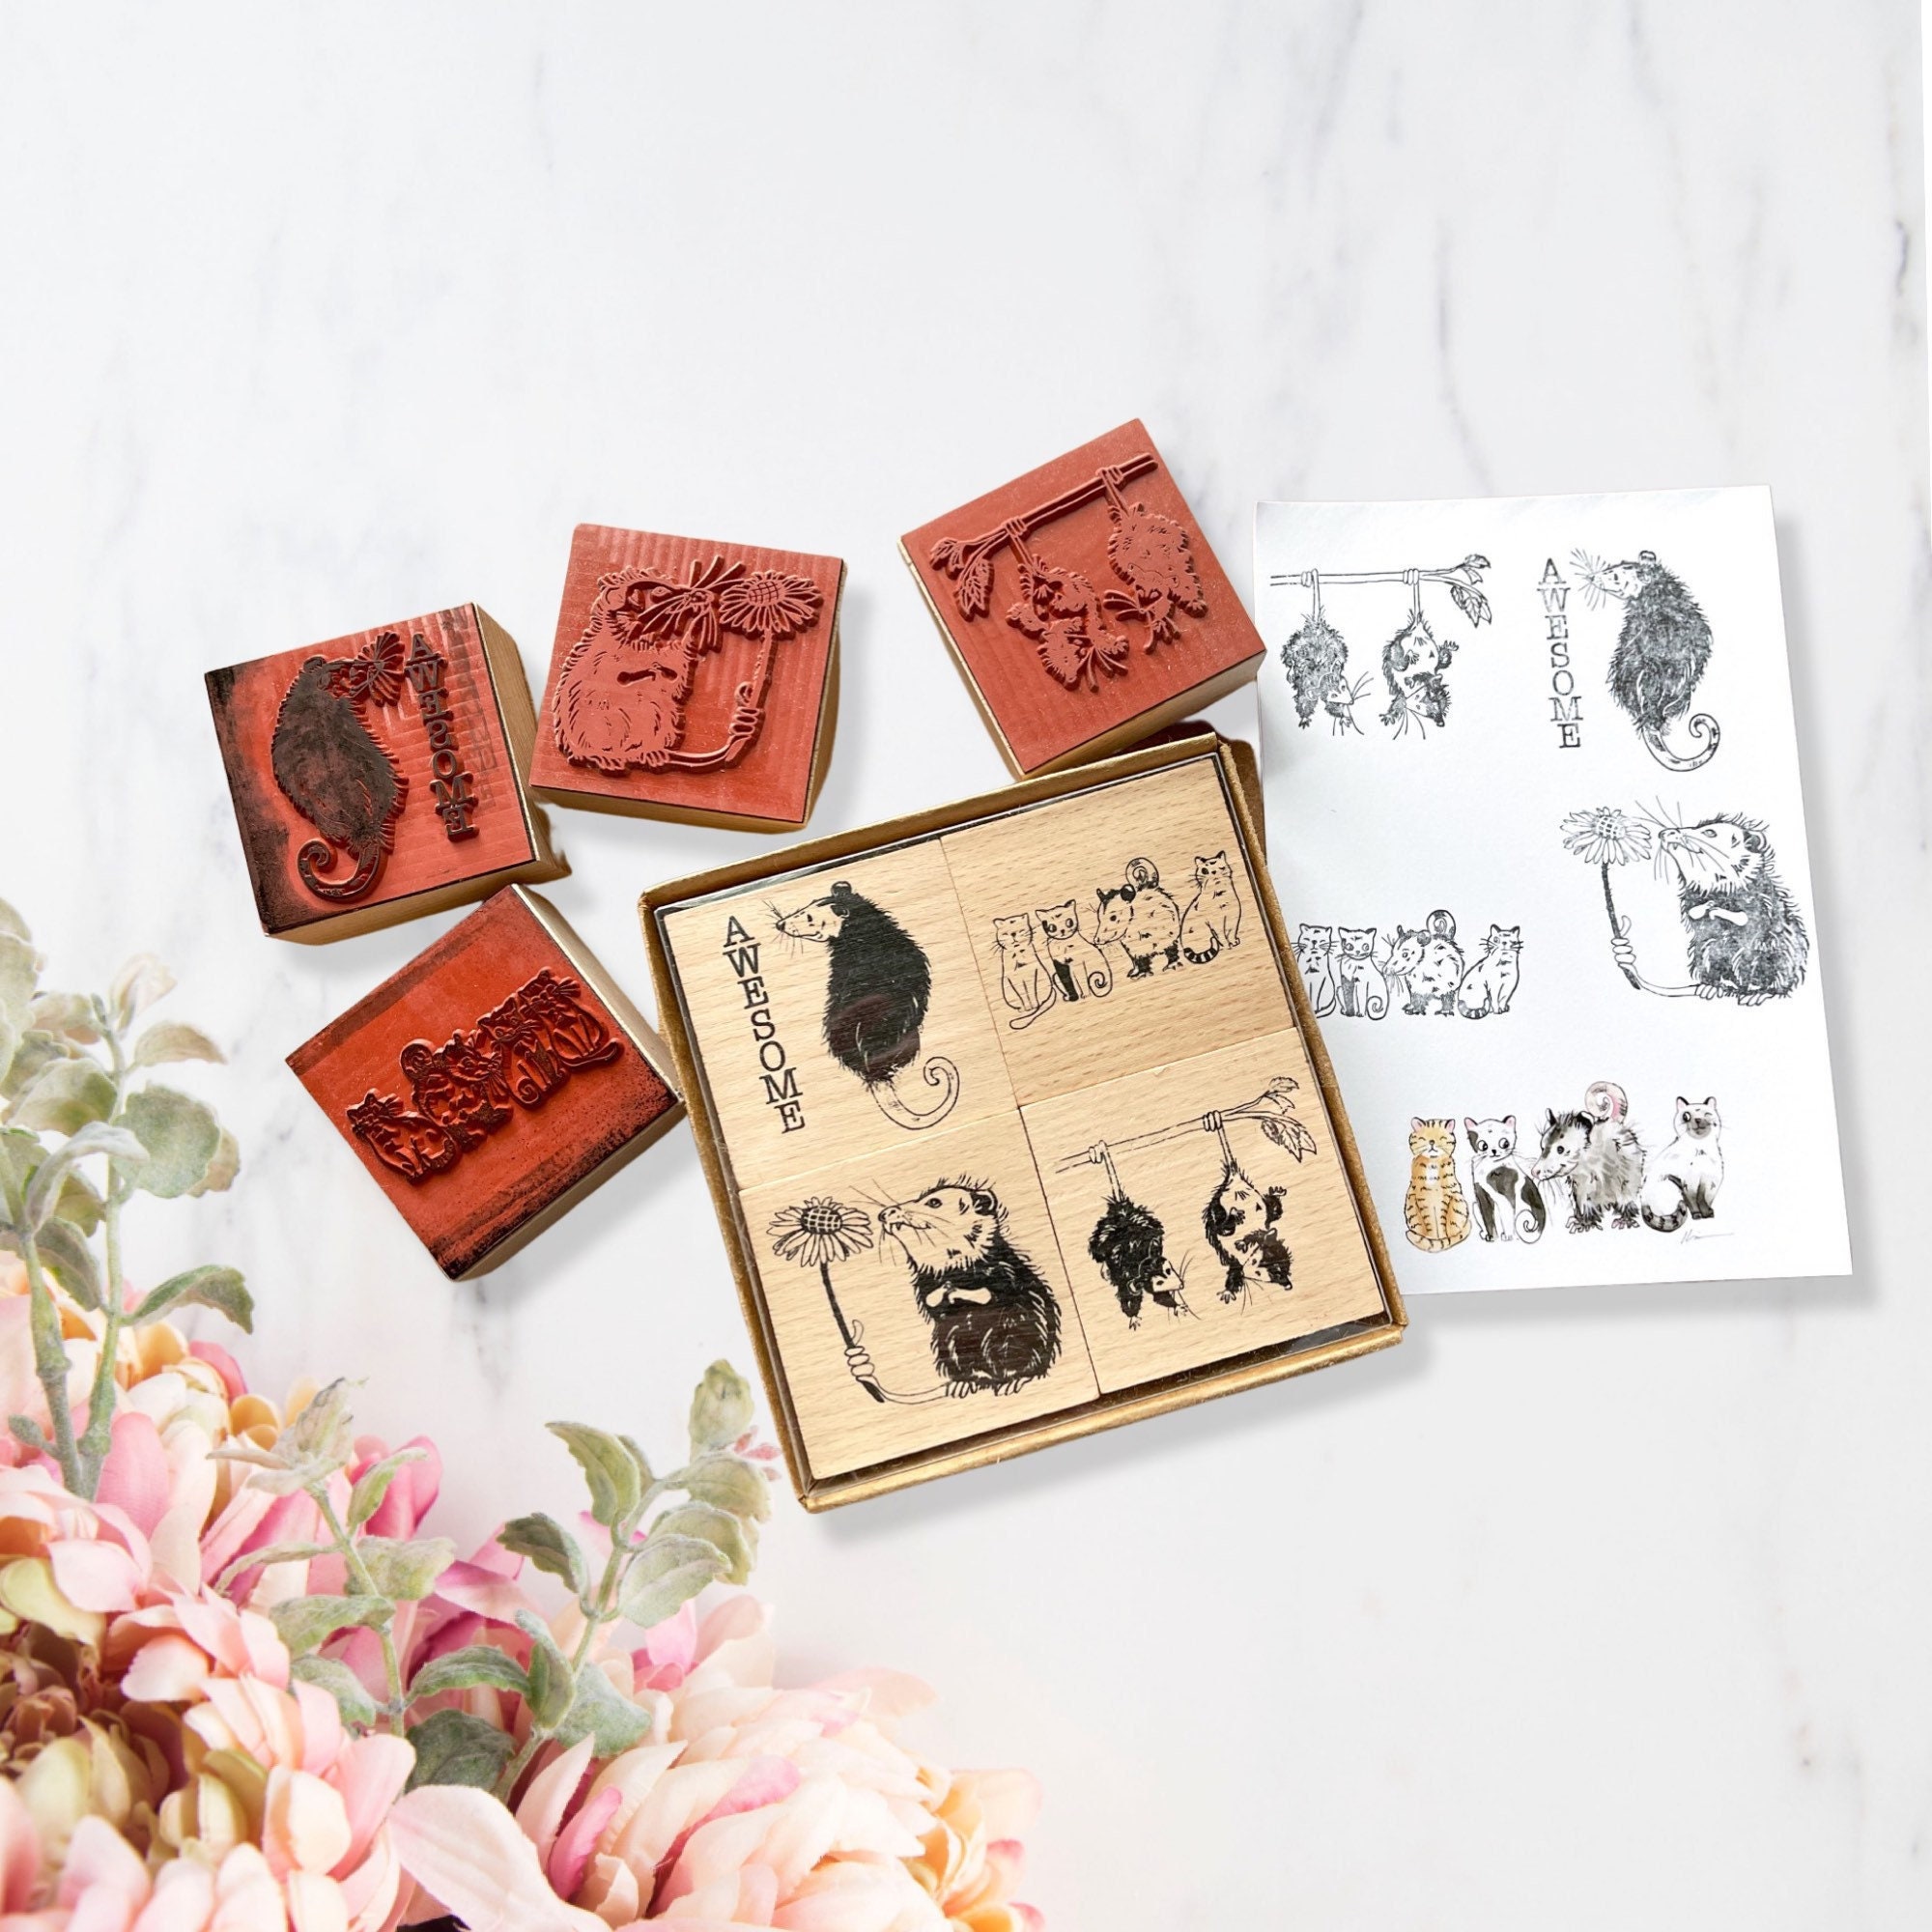 Custom rubber stamps - The stocking stuffer to end all stocking